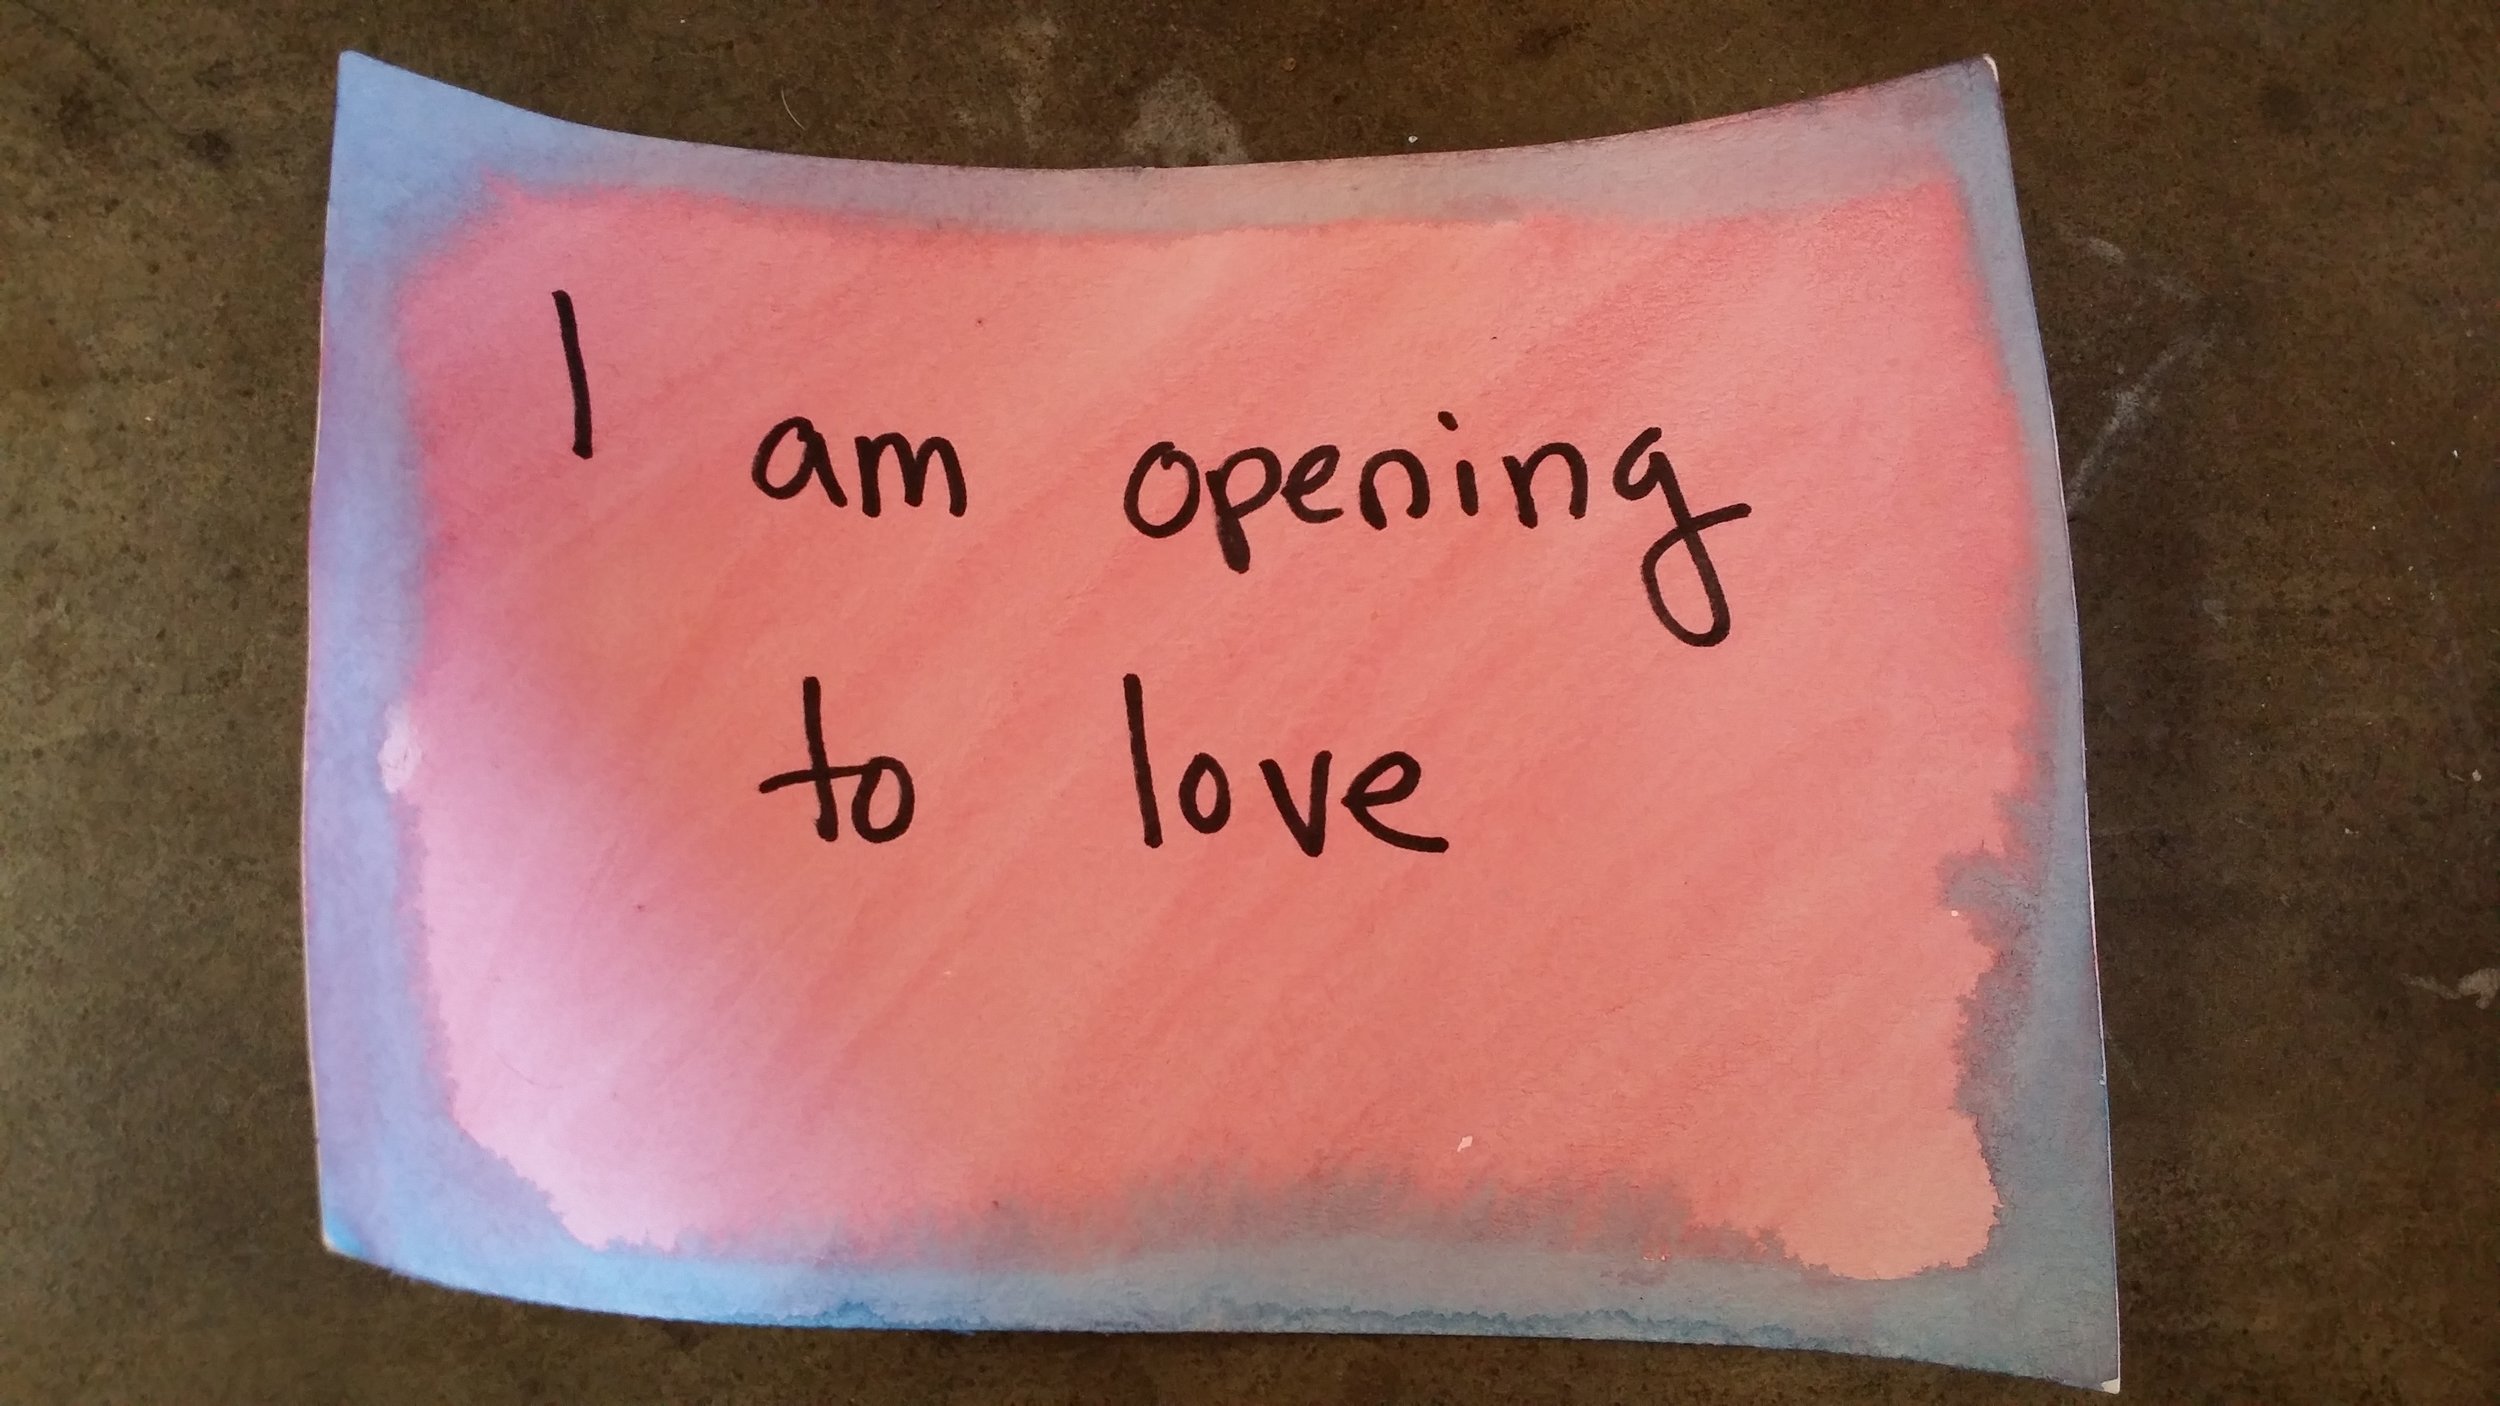 I am opening to love.